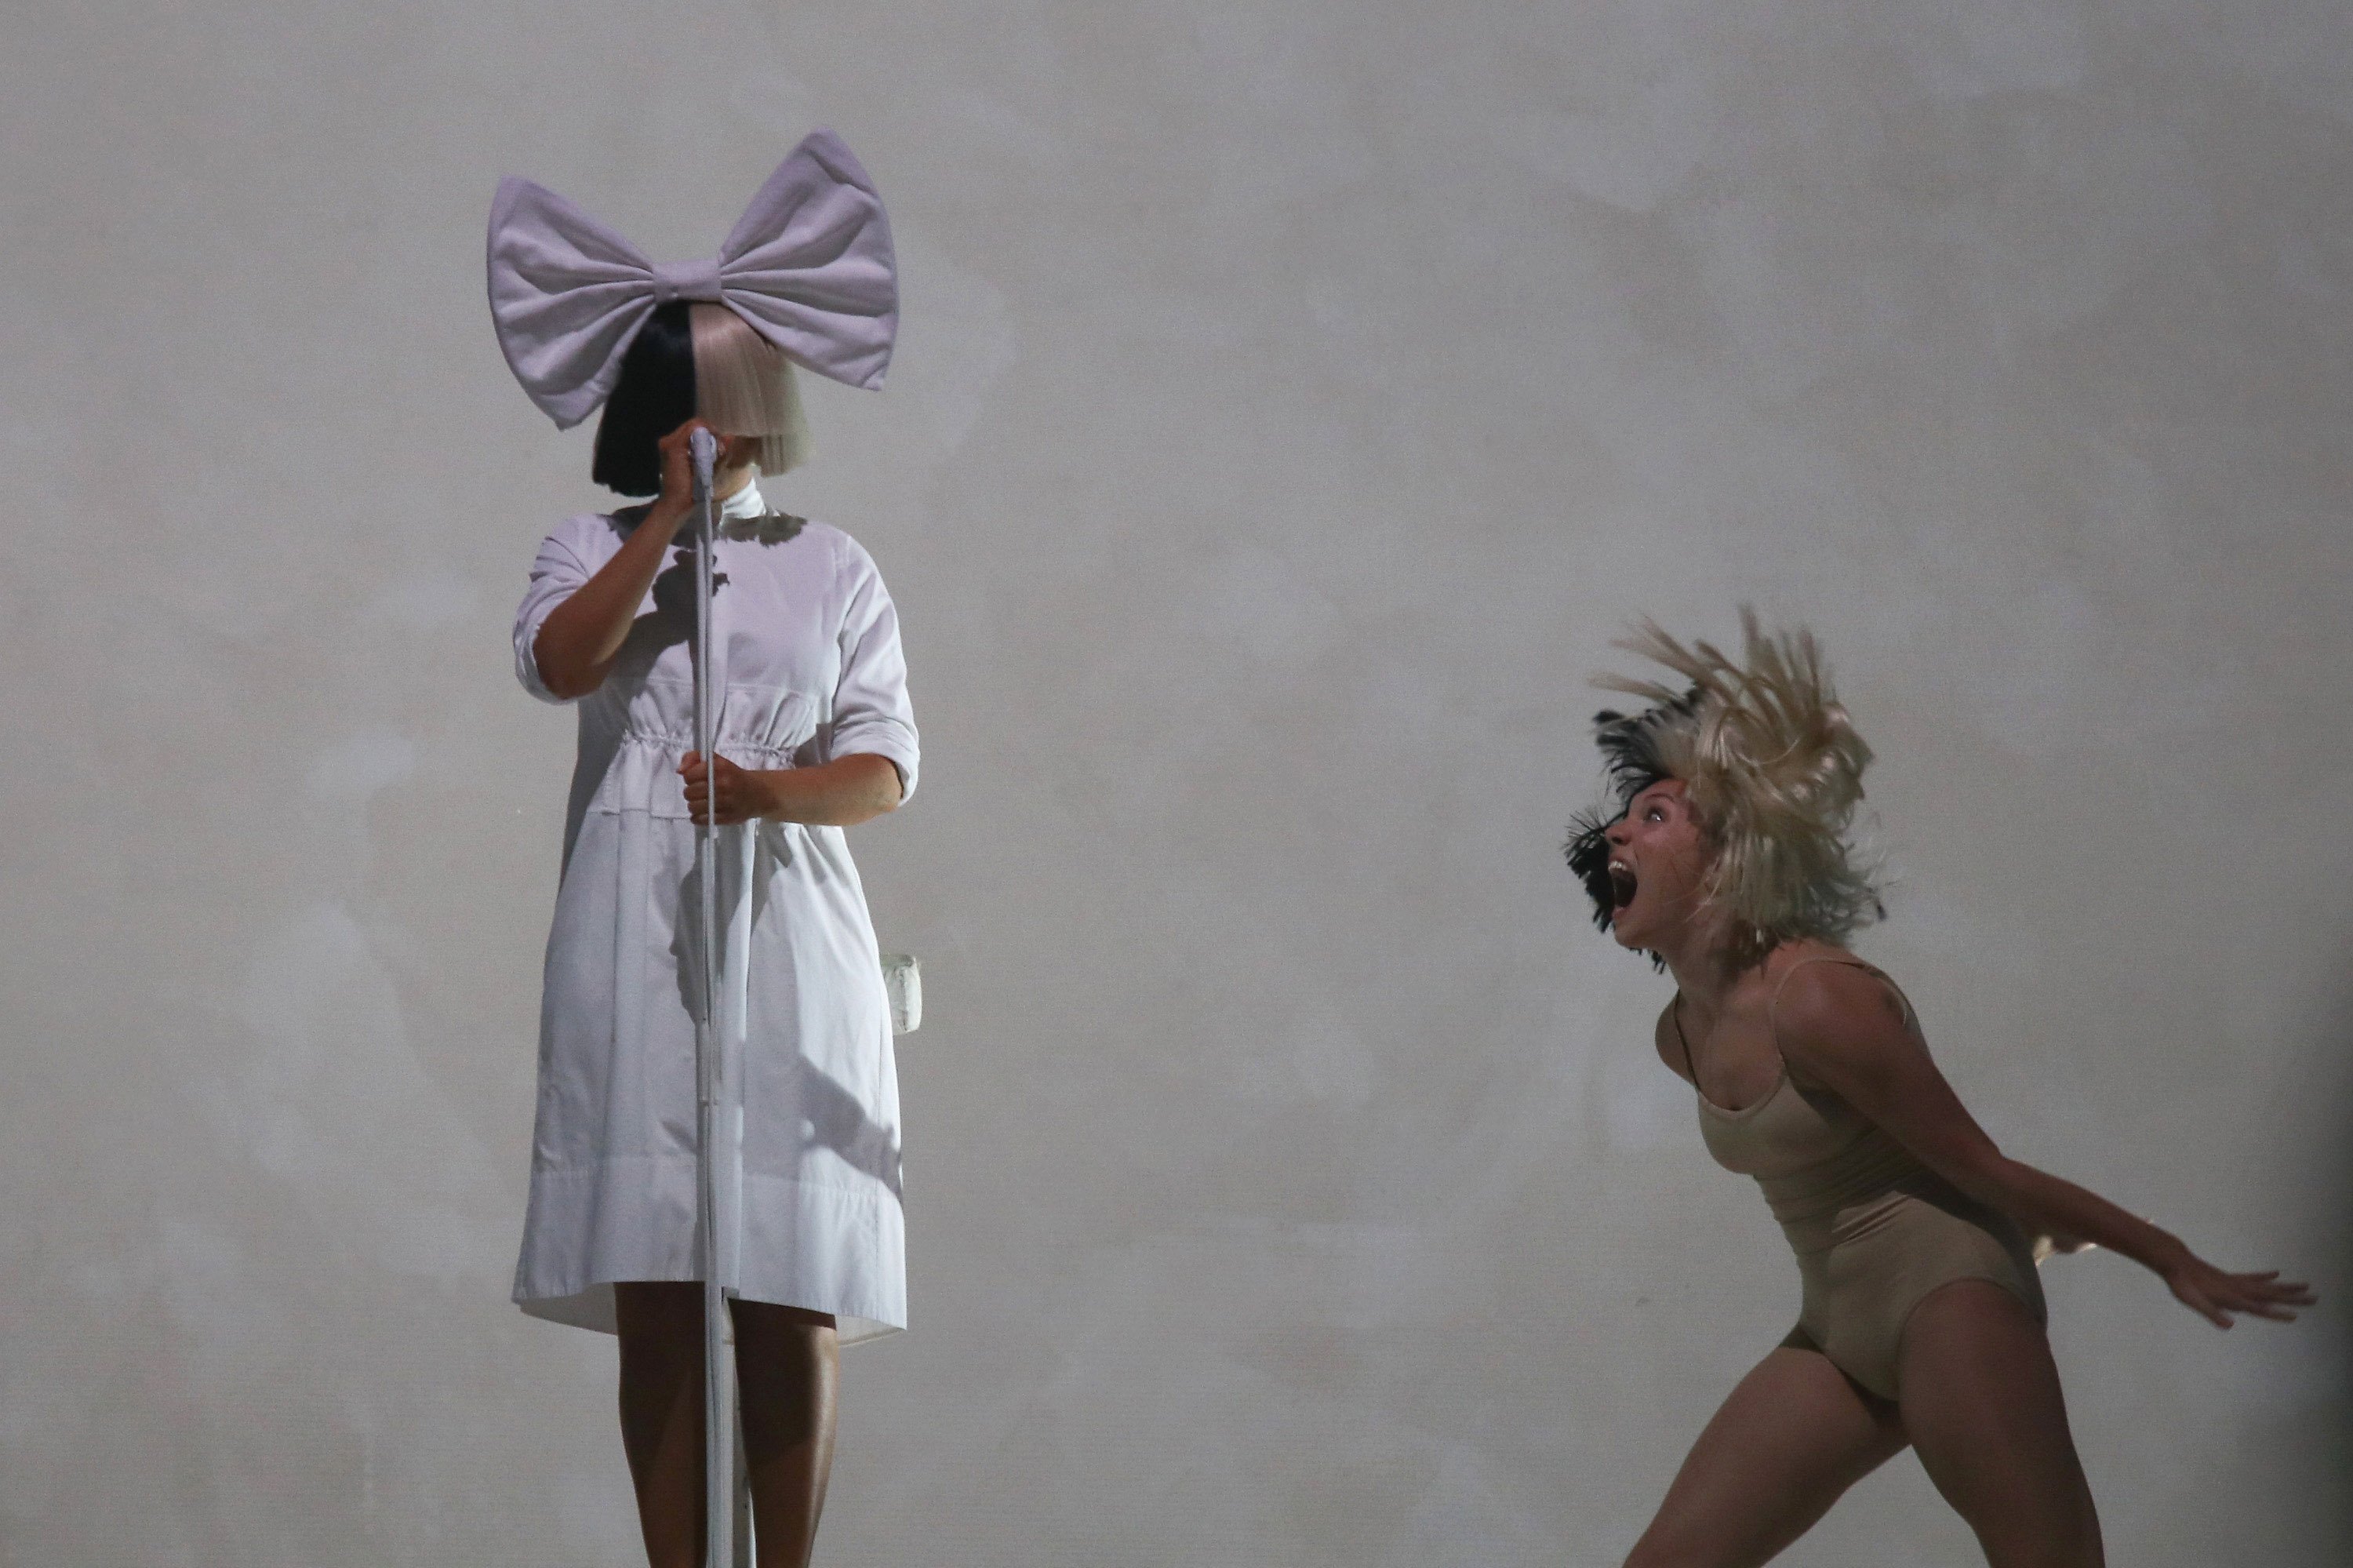 Sia and Maddie Ziegler perform a concert in Aukland